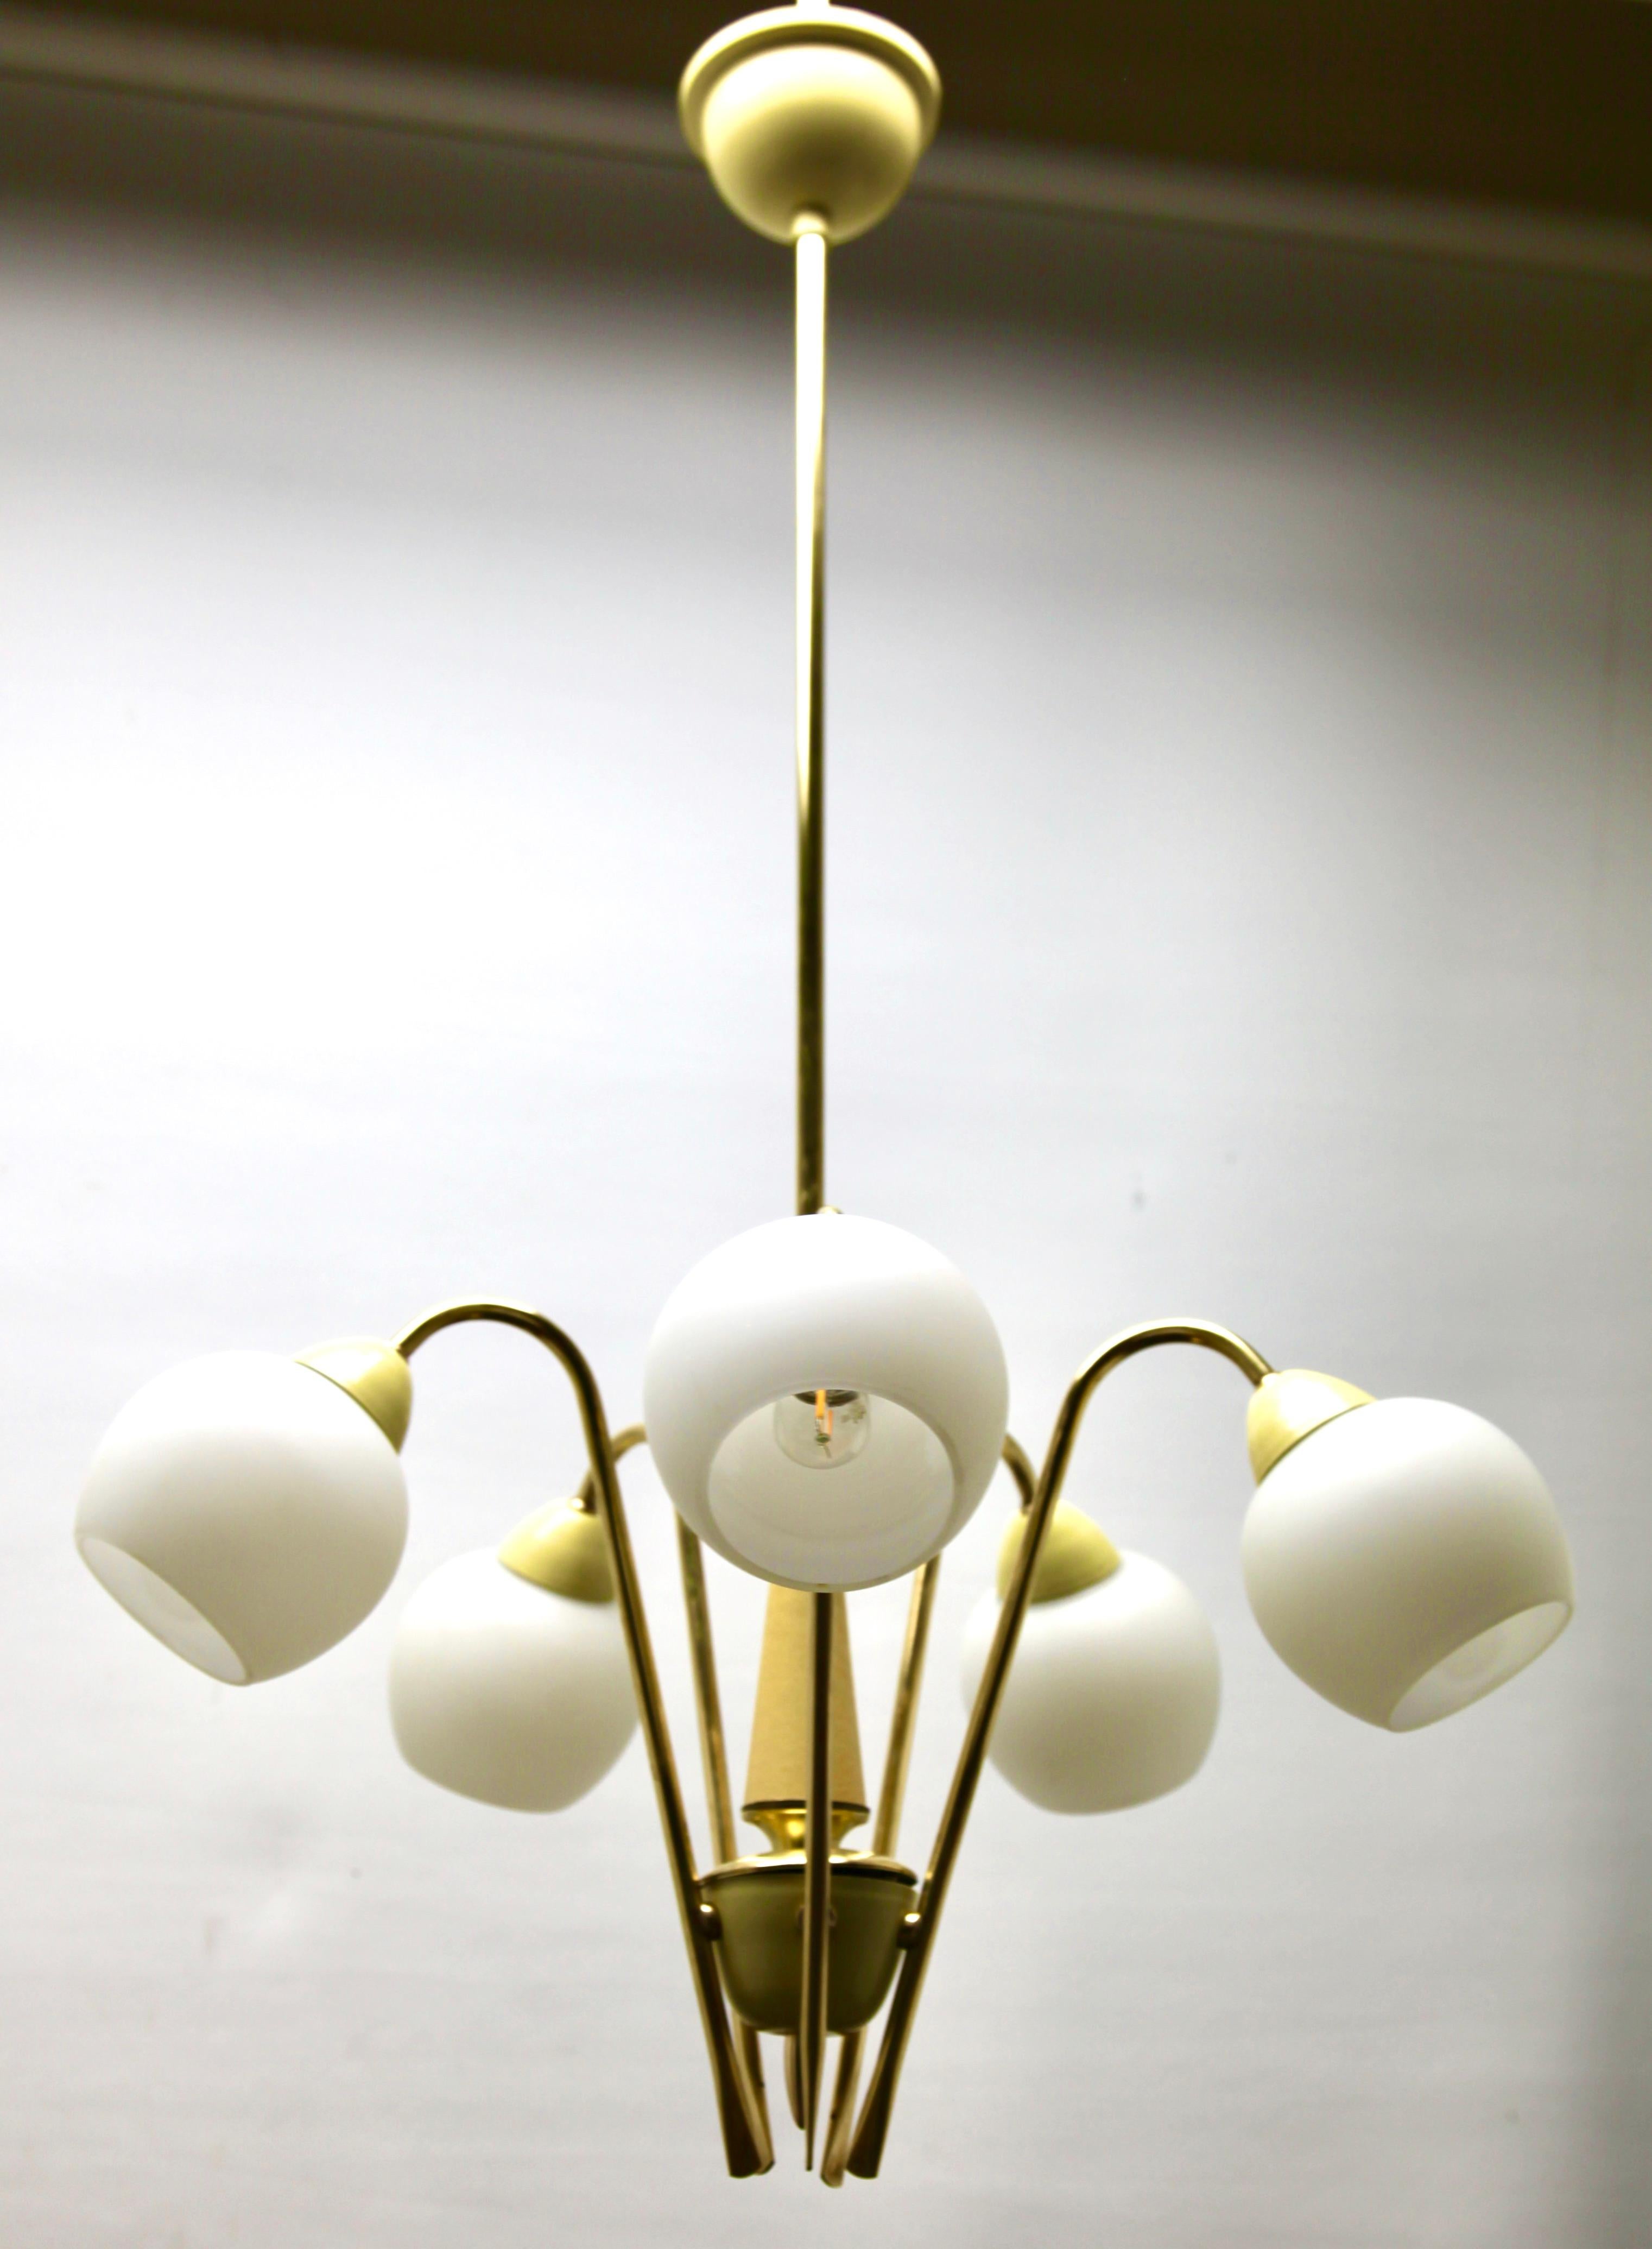 Five arms chandelier style of Stilnovo.
Photography fails to capture the simple elegant illumination provided by this lamp.

Recently cleaned and polished so that it in excellent condition and in full working order 
has also been re-wired and New